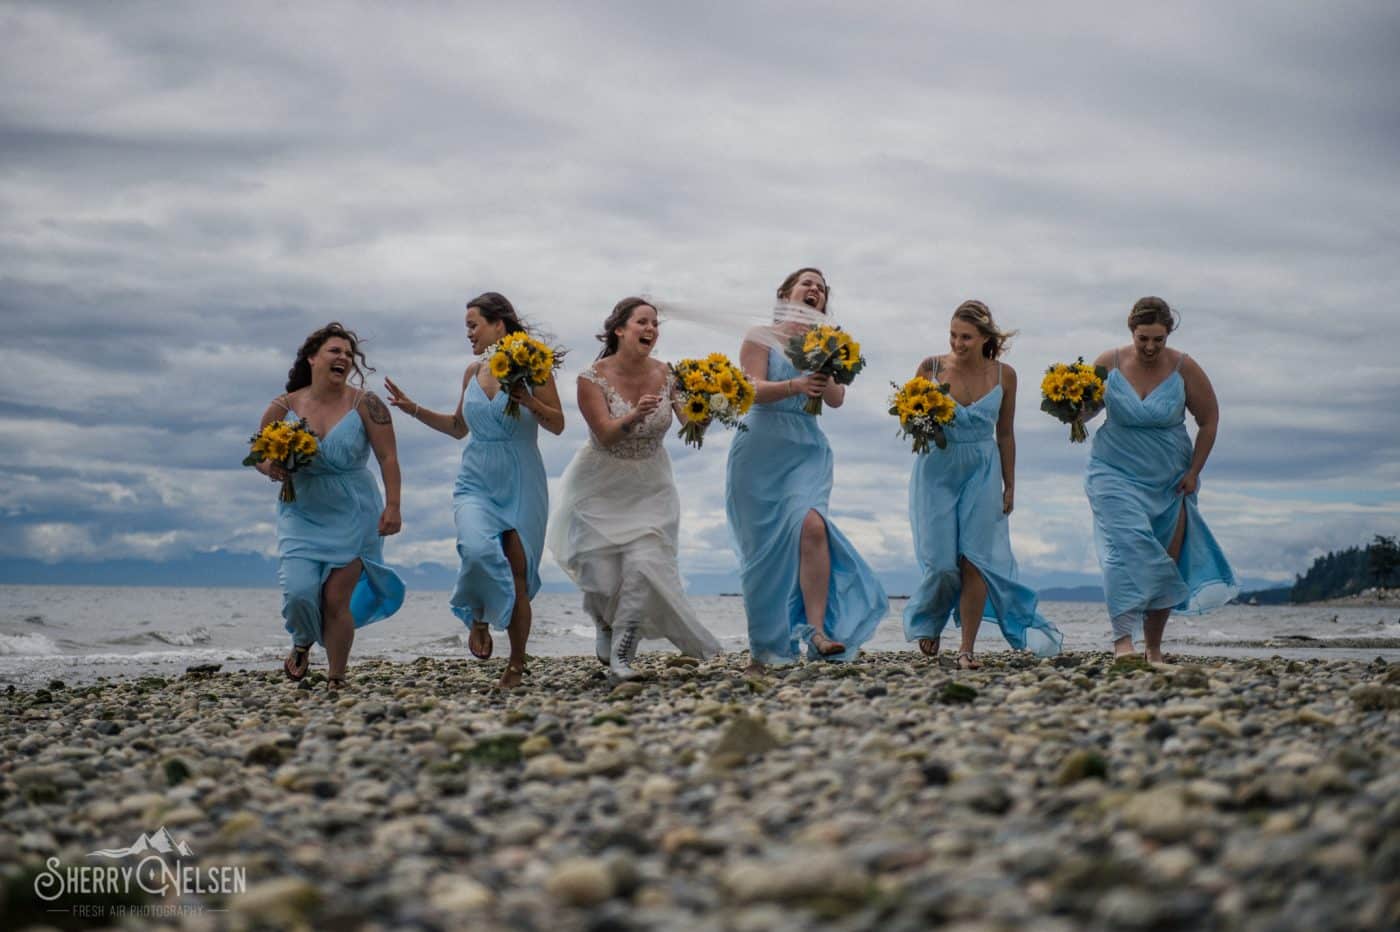 the bride and her bridesmaids run along the beach in happiness as the wind blows their dresses and viels around